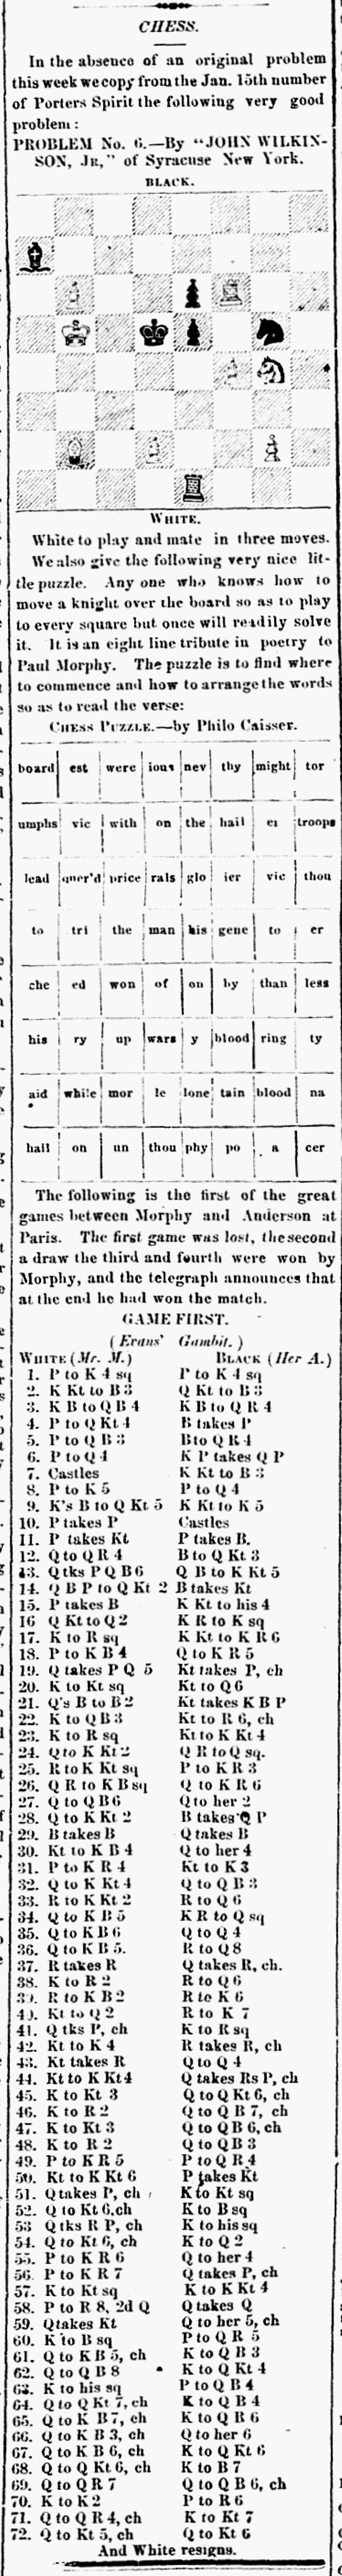 1859.02.02-01 Houston Weekly Telegraph.png